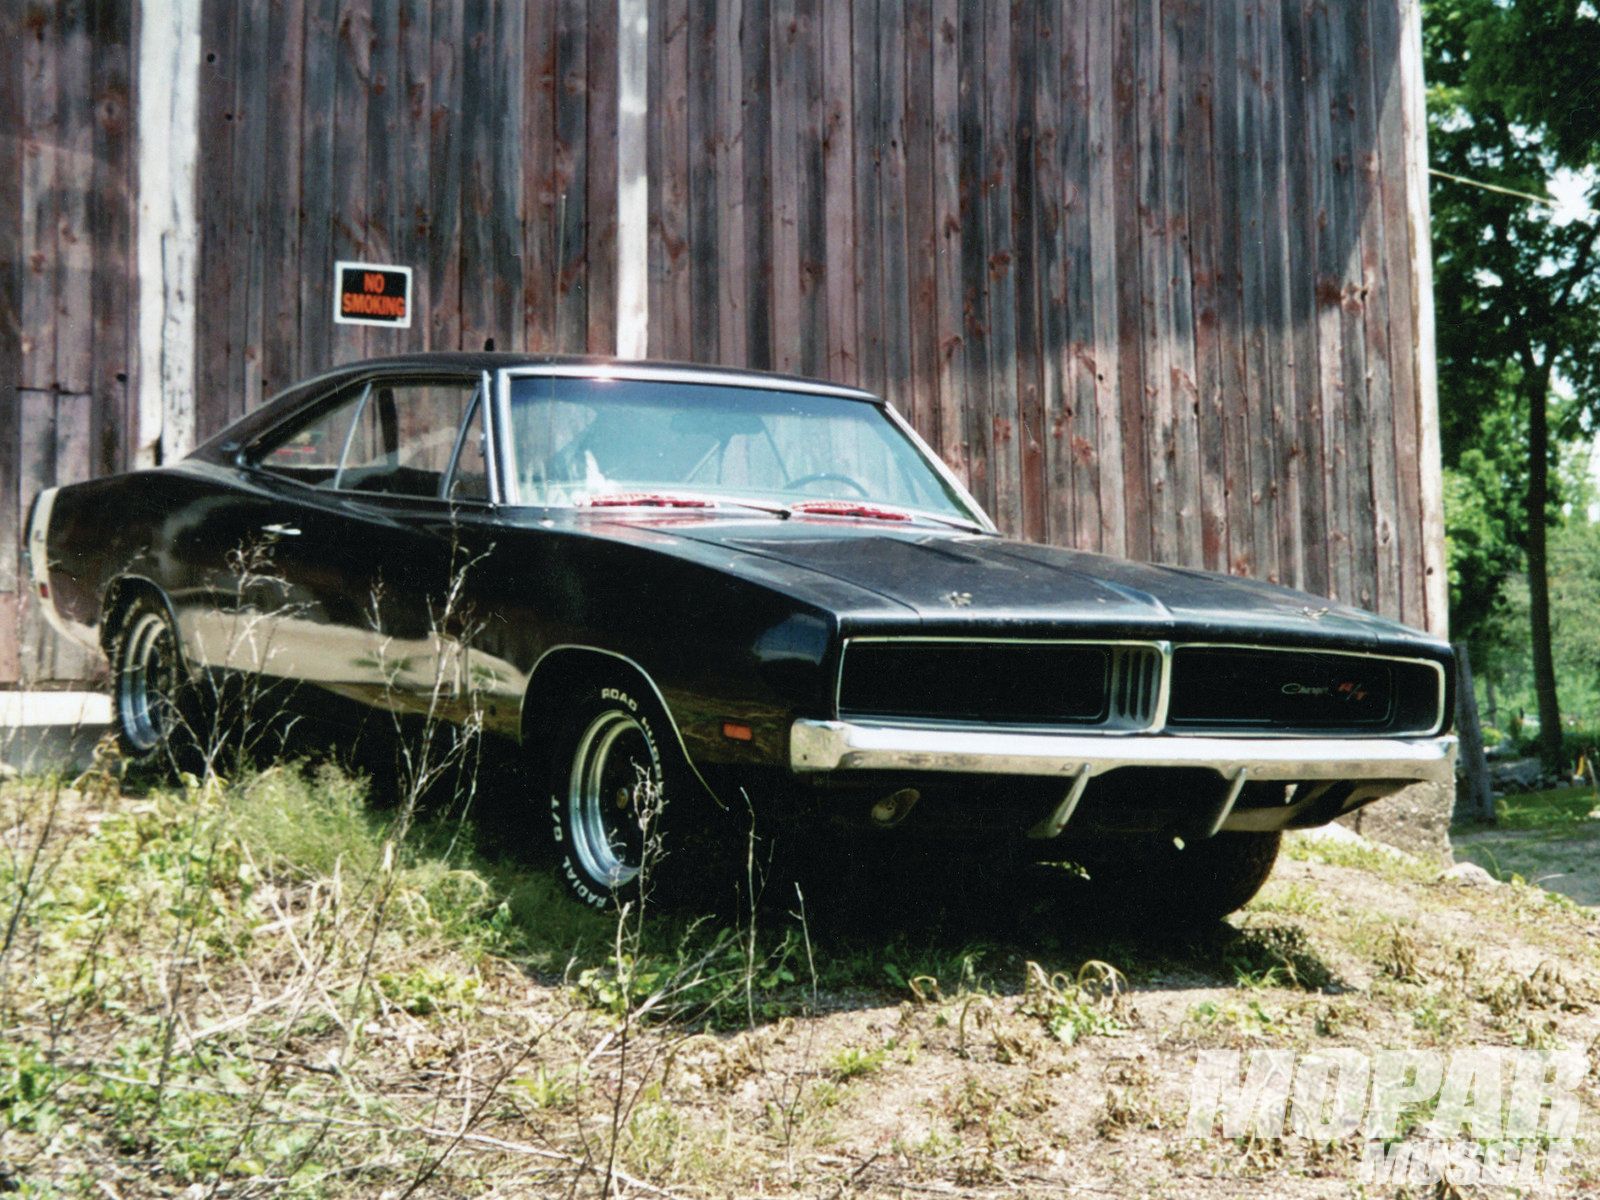 Dodge Charger Rt In Barn Black Classic HD Wallpaper Muscle